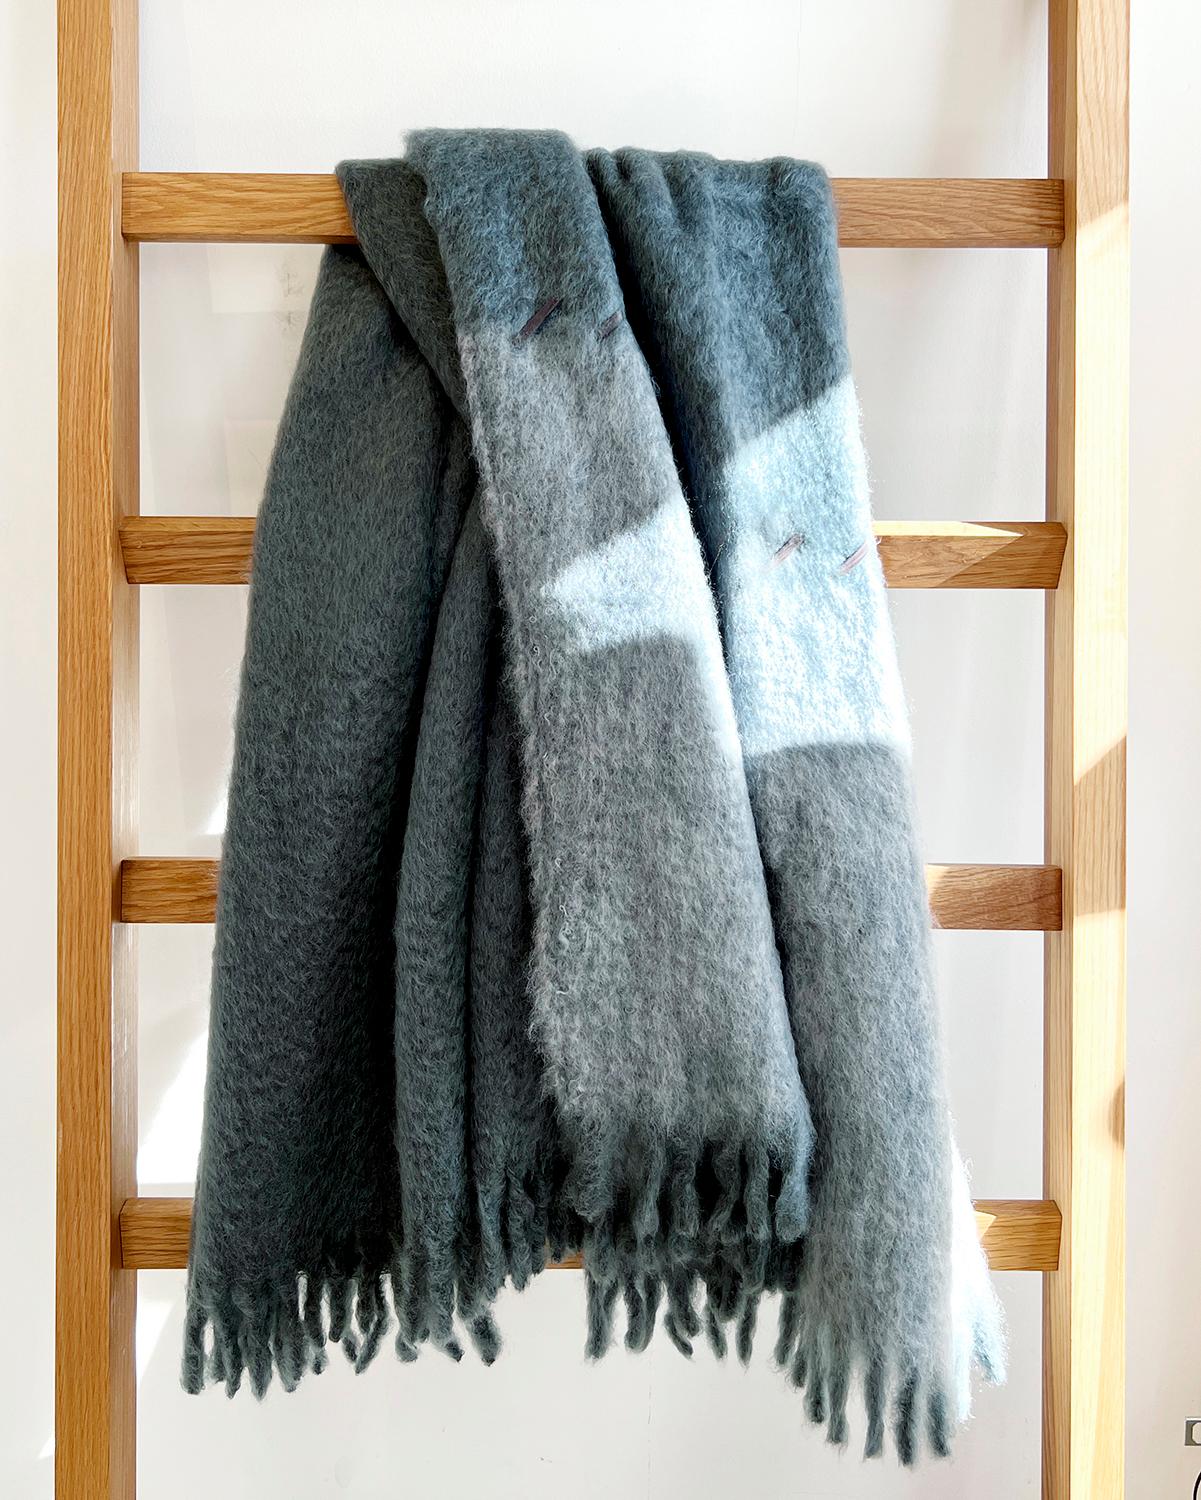 Spanish Mantas Ezcaray Steam and Smoke Blue Mohair Blanket Throw w/ Suede Whipstitch For Sale